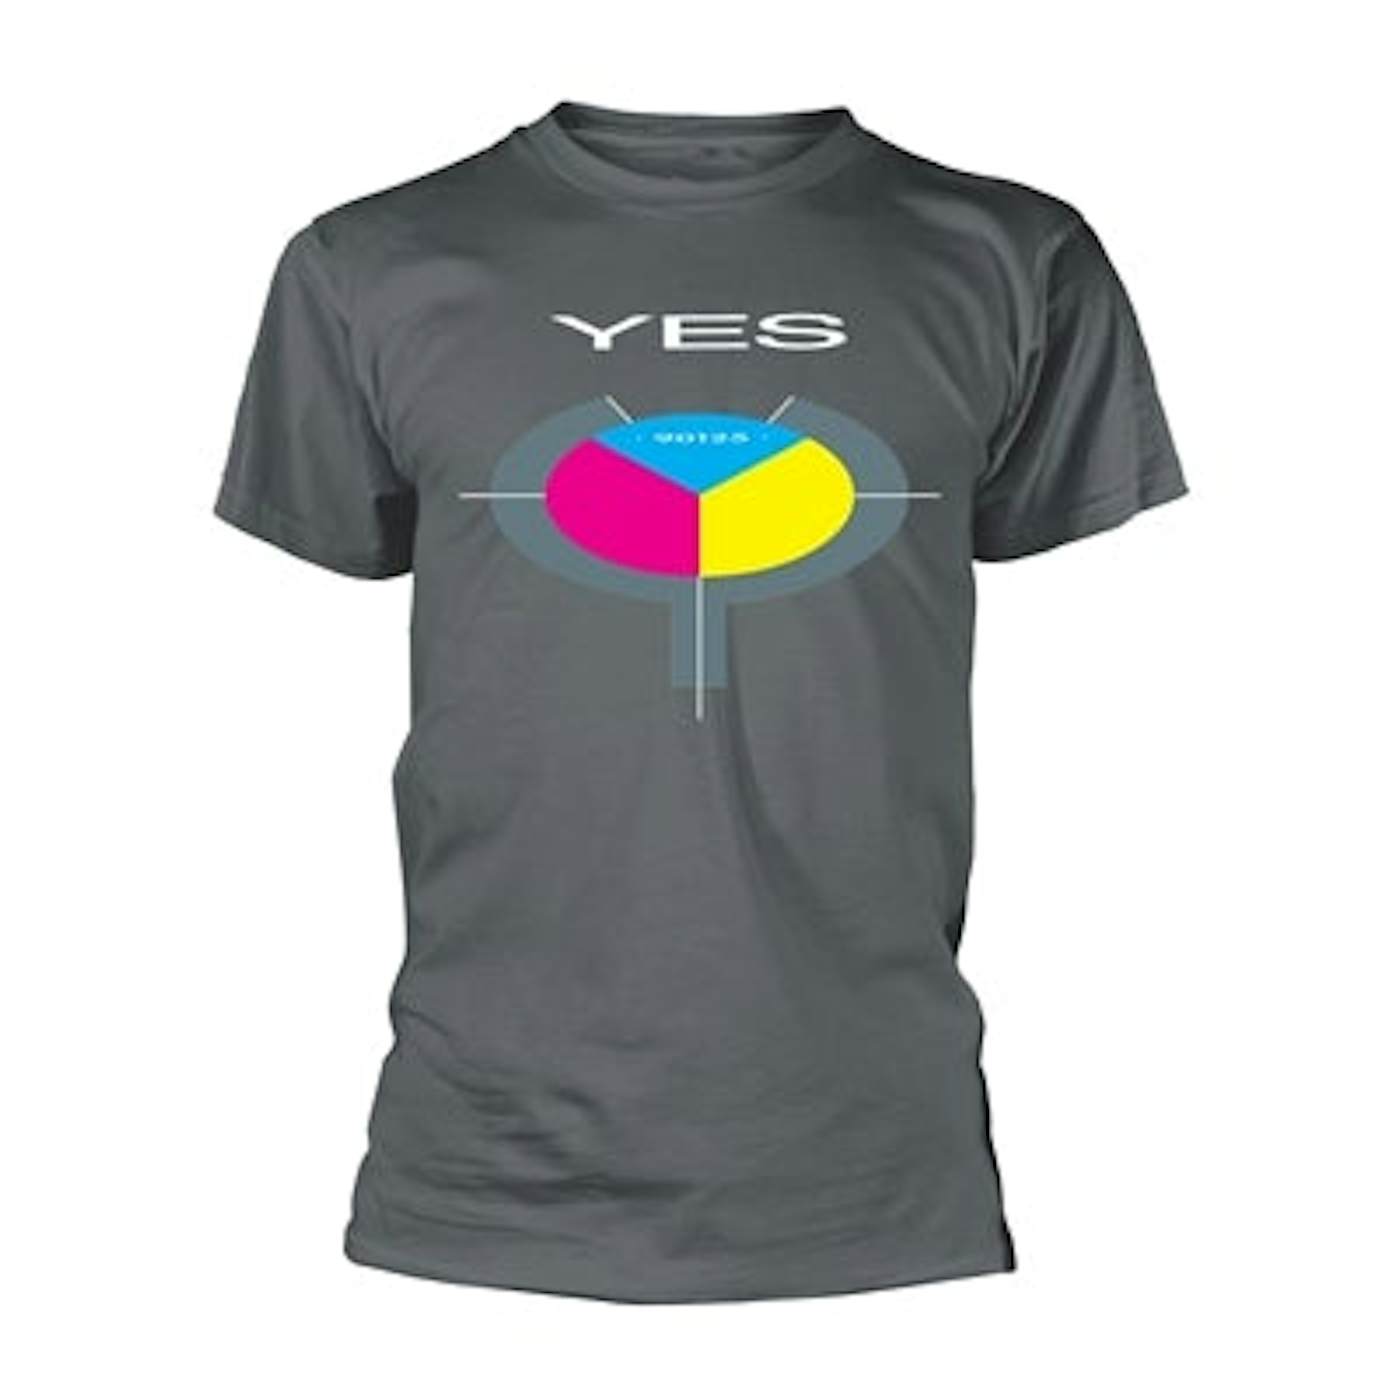 Yes T-Shirt - 90125